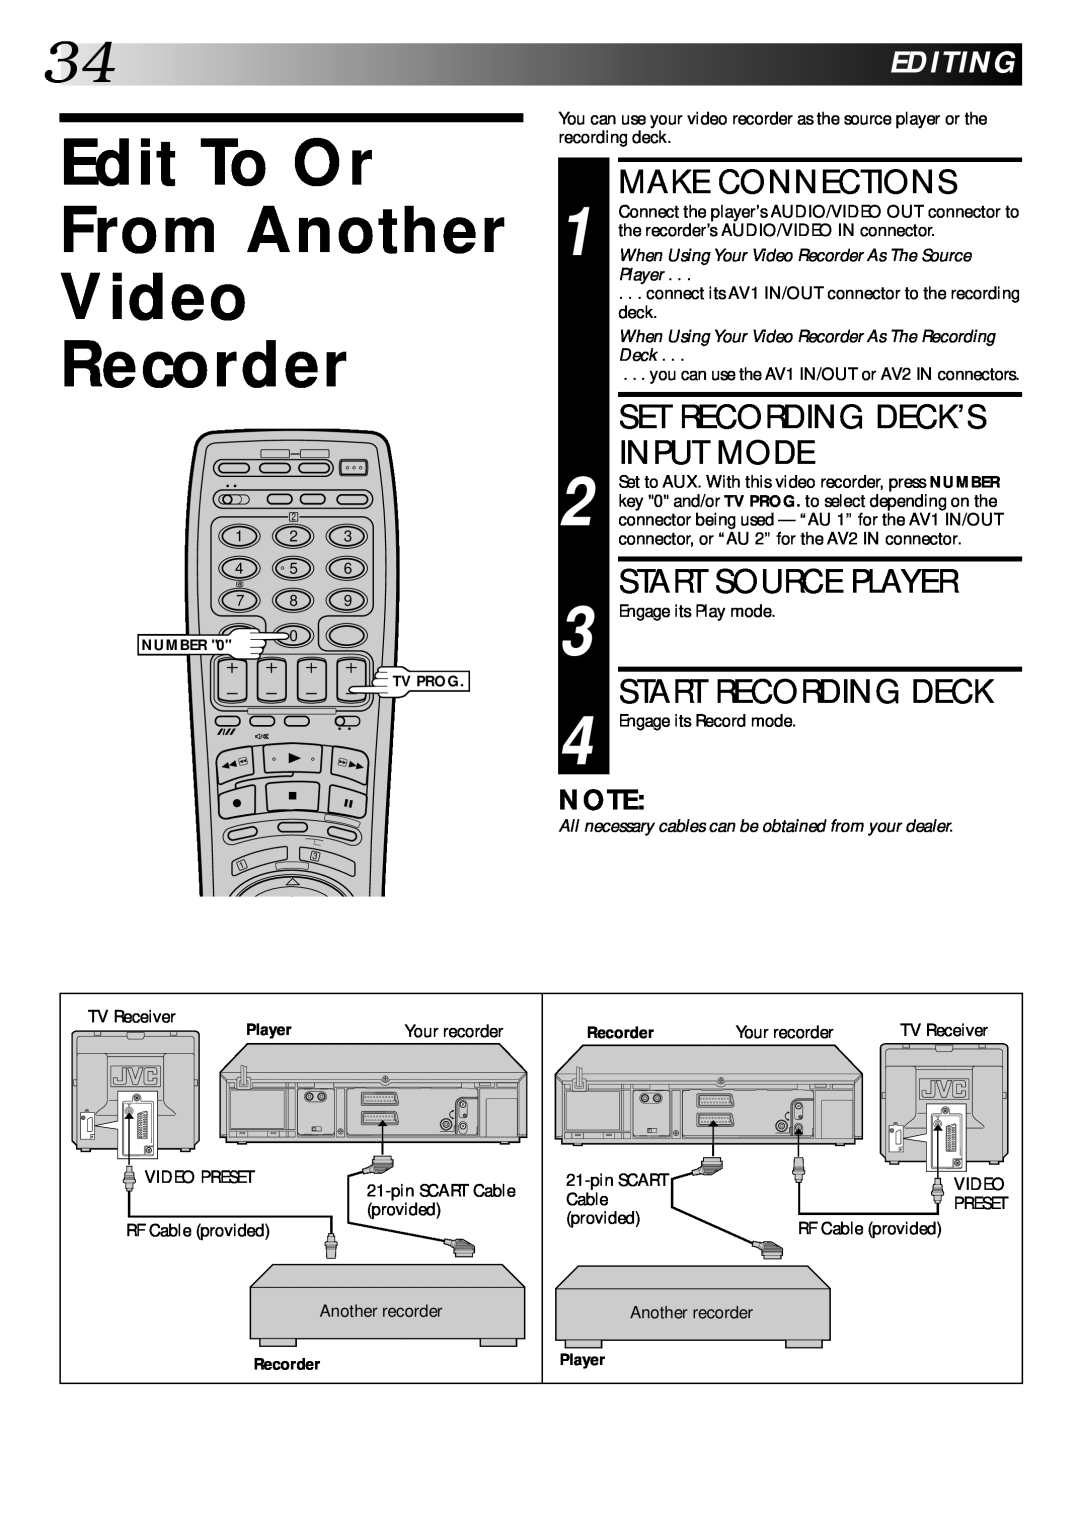 JVC PU30425 Edit To Or From Another Video Recorder, Set Recording Deck’S Input Mode, Start Source Player, Editing 